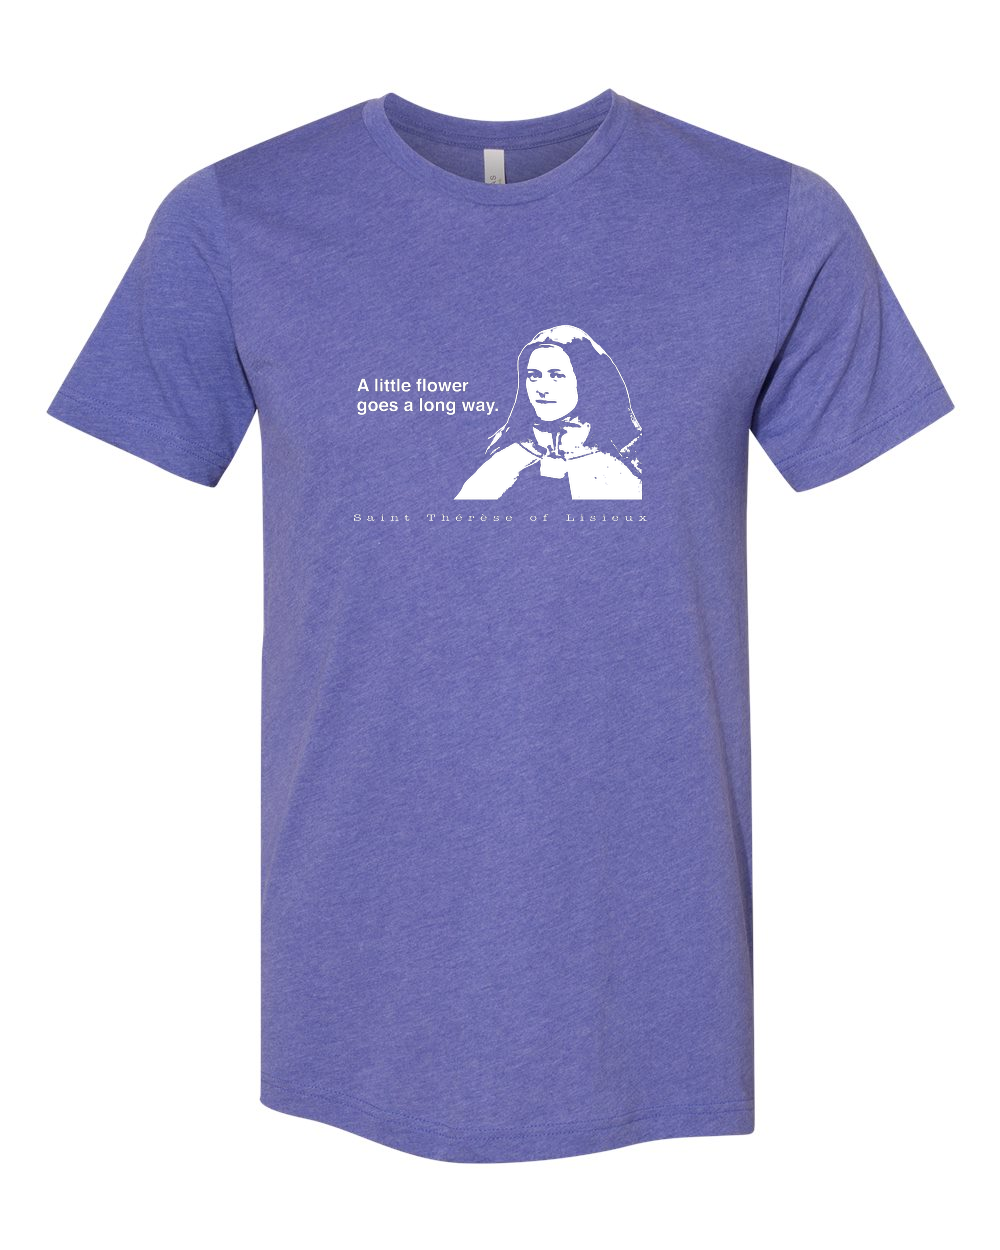 A Little Flower Goes a Long Way - St. Therese of Lisieux T Shirt X-Large